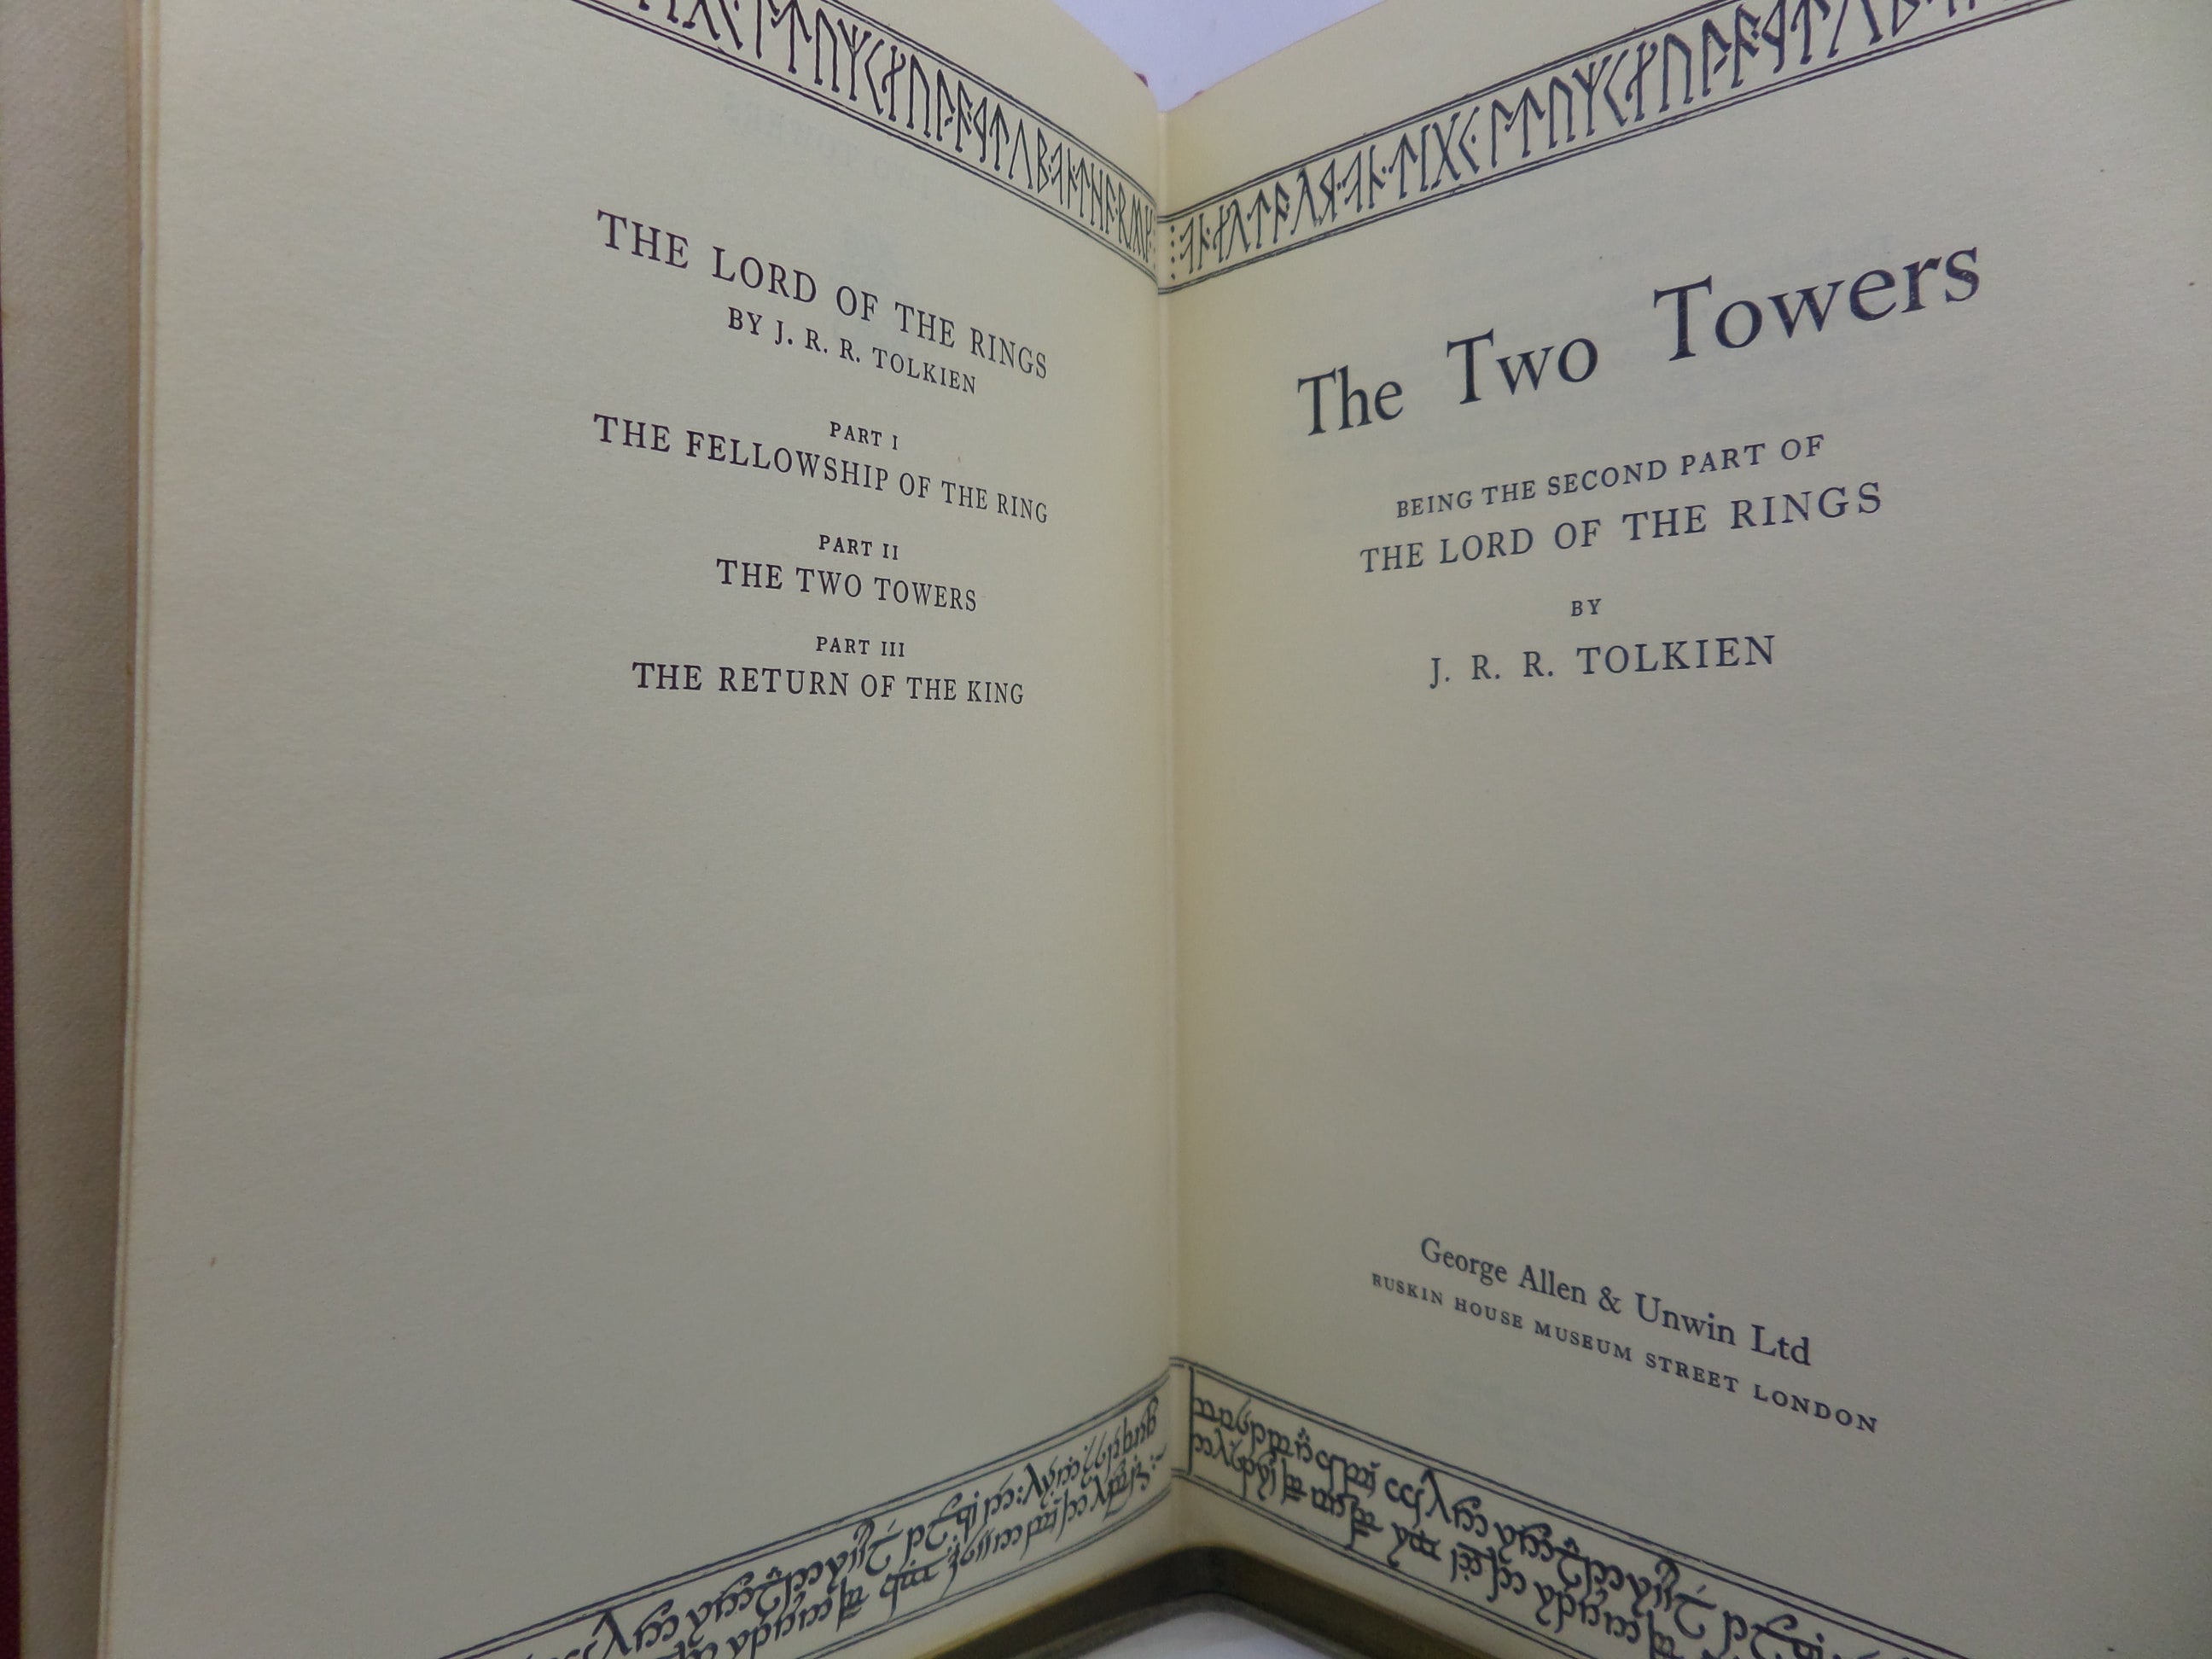 THE TWO TOWERS: BEING THE SECOND PART OF THE LORD OF THE RINGS 1956 J.R.R. TOLKIEN 4TH IMPRESSION